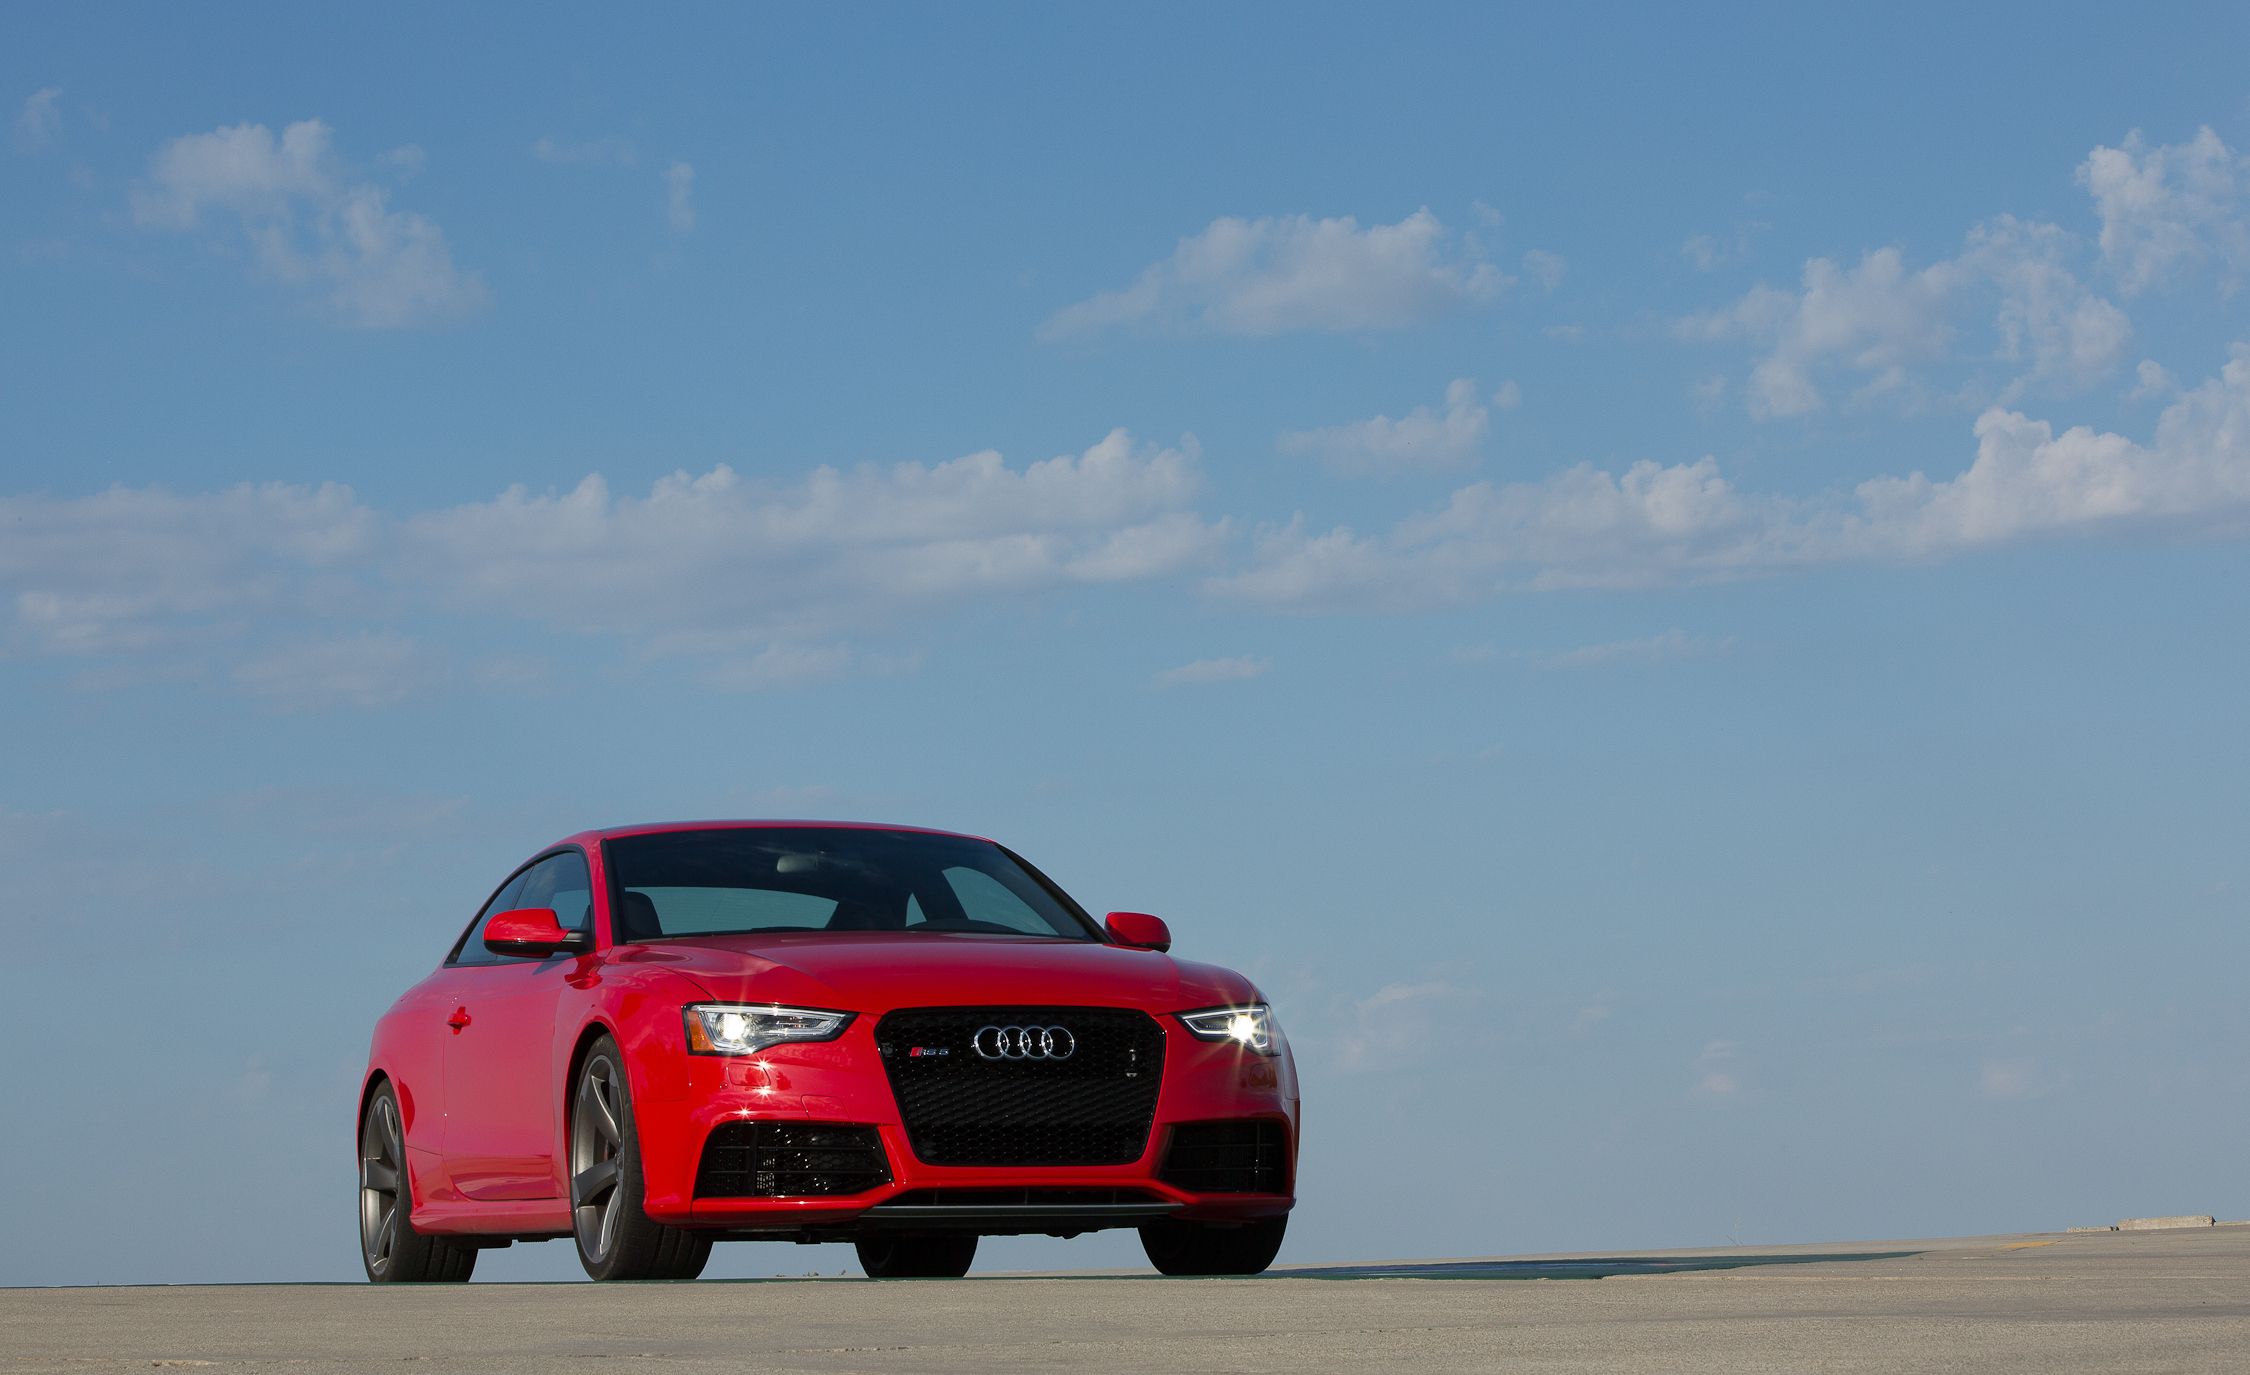 2013 Audi Rs 5 Exterior Color Red Metallic (View 22 of 41)